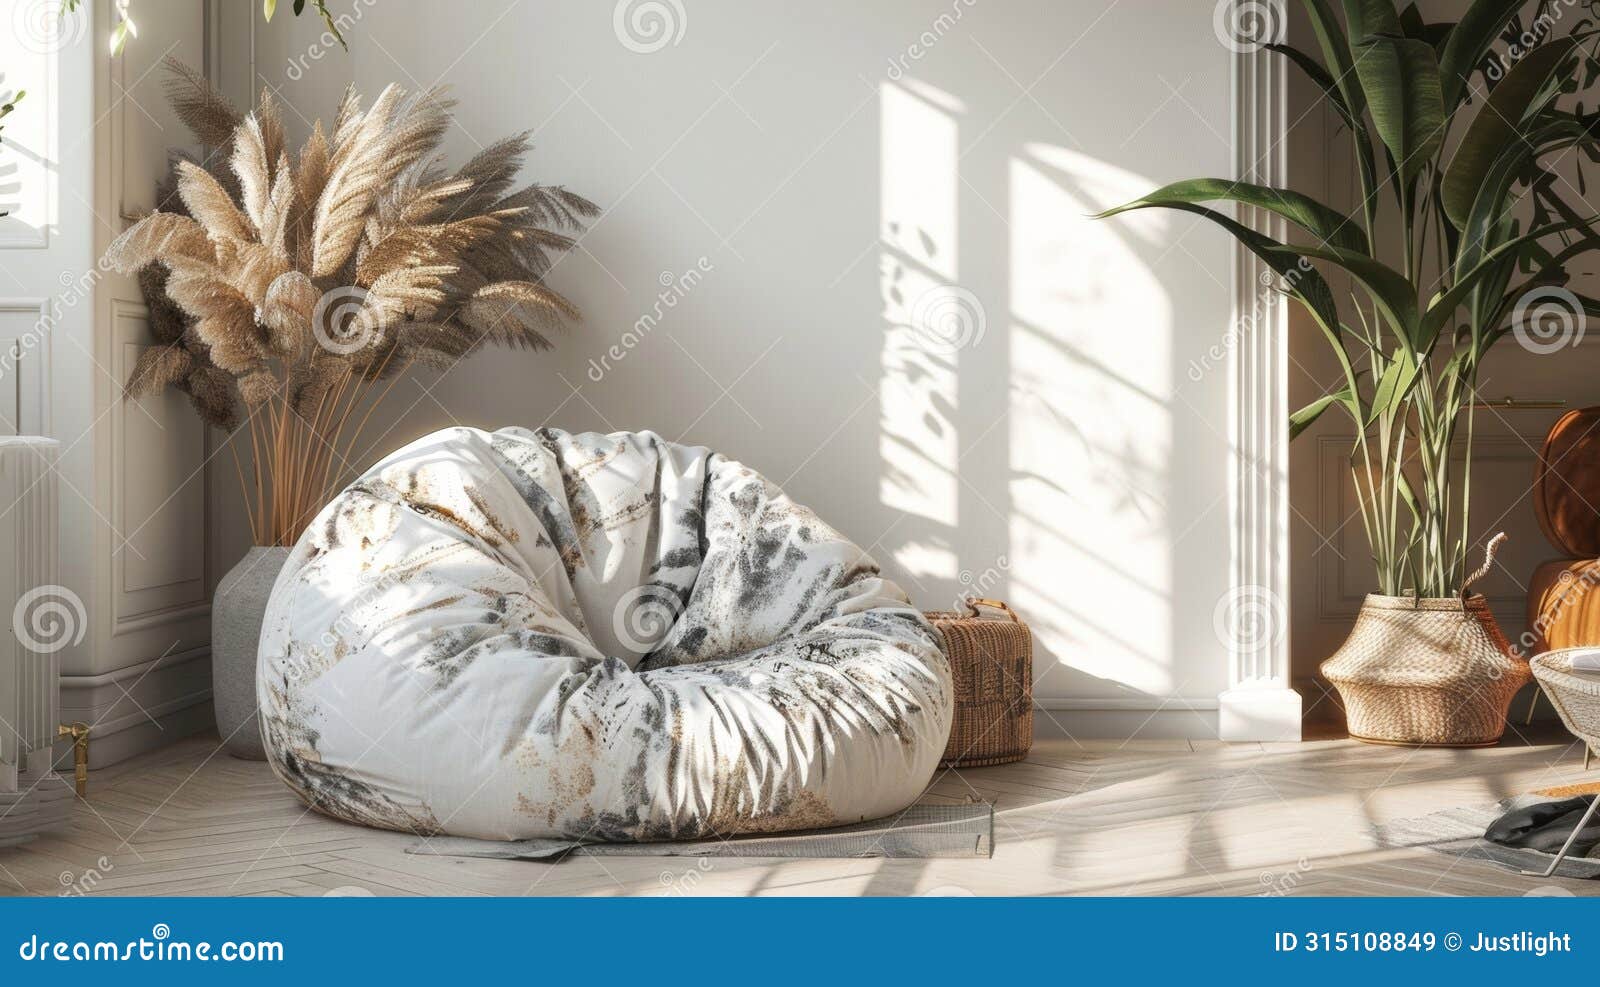 blank mockup of a bean bag in a trendy tiedye print adding a bohemian touch to your home decor.